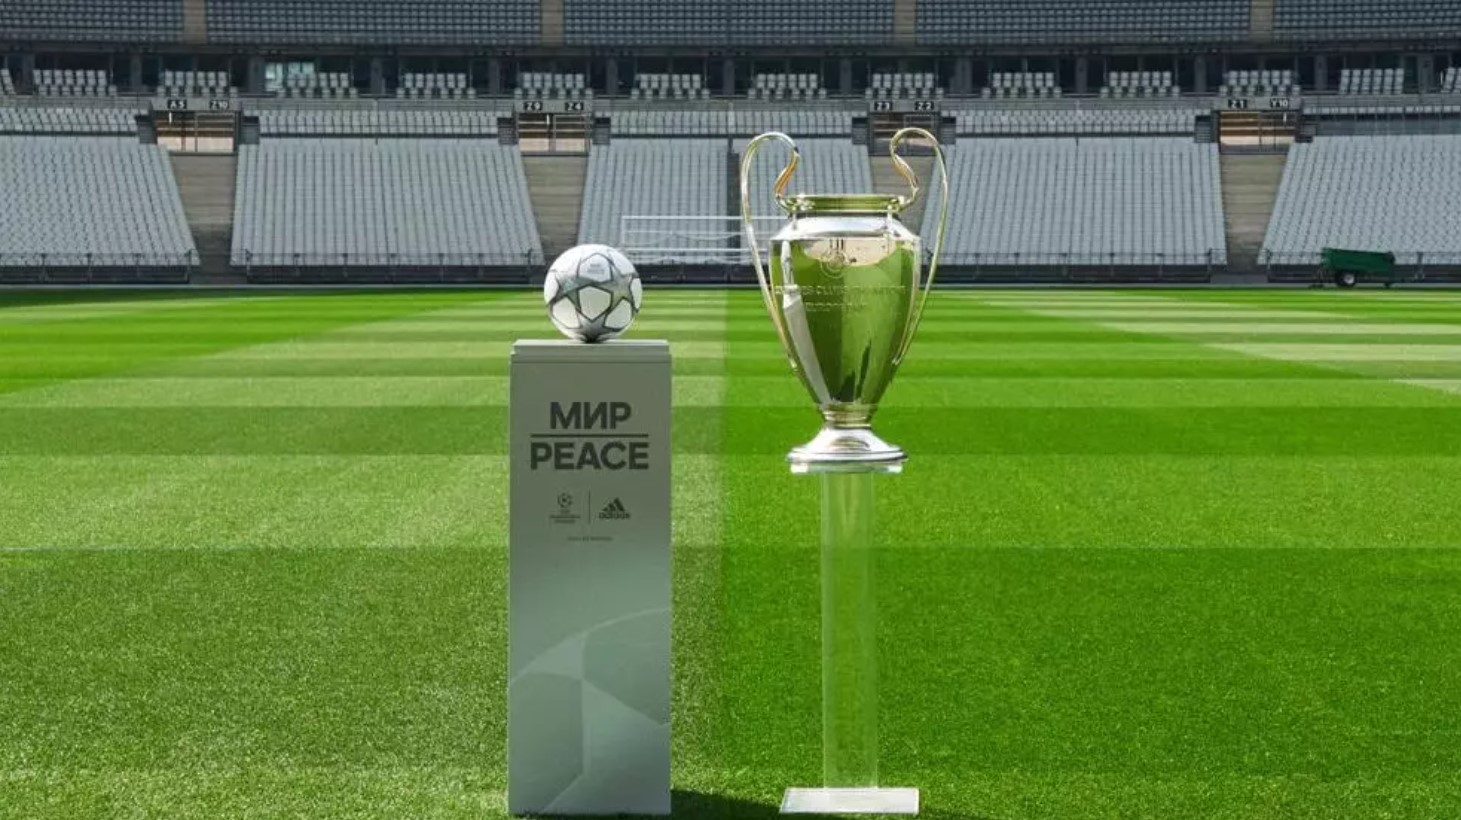 LIVERPOOL-REAL MADRID, LIVE ONLINE CHAMPIONS LEAGUE FINAL